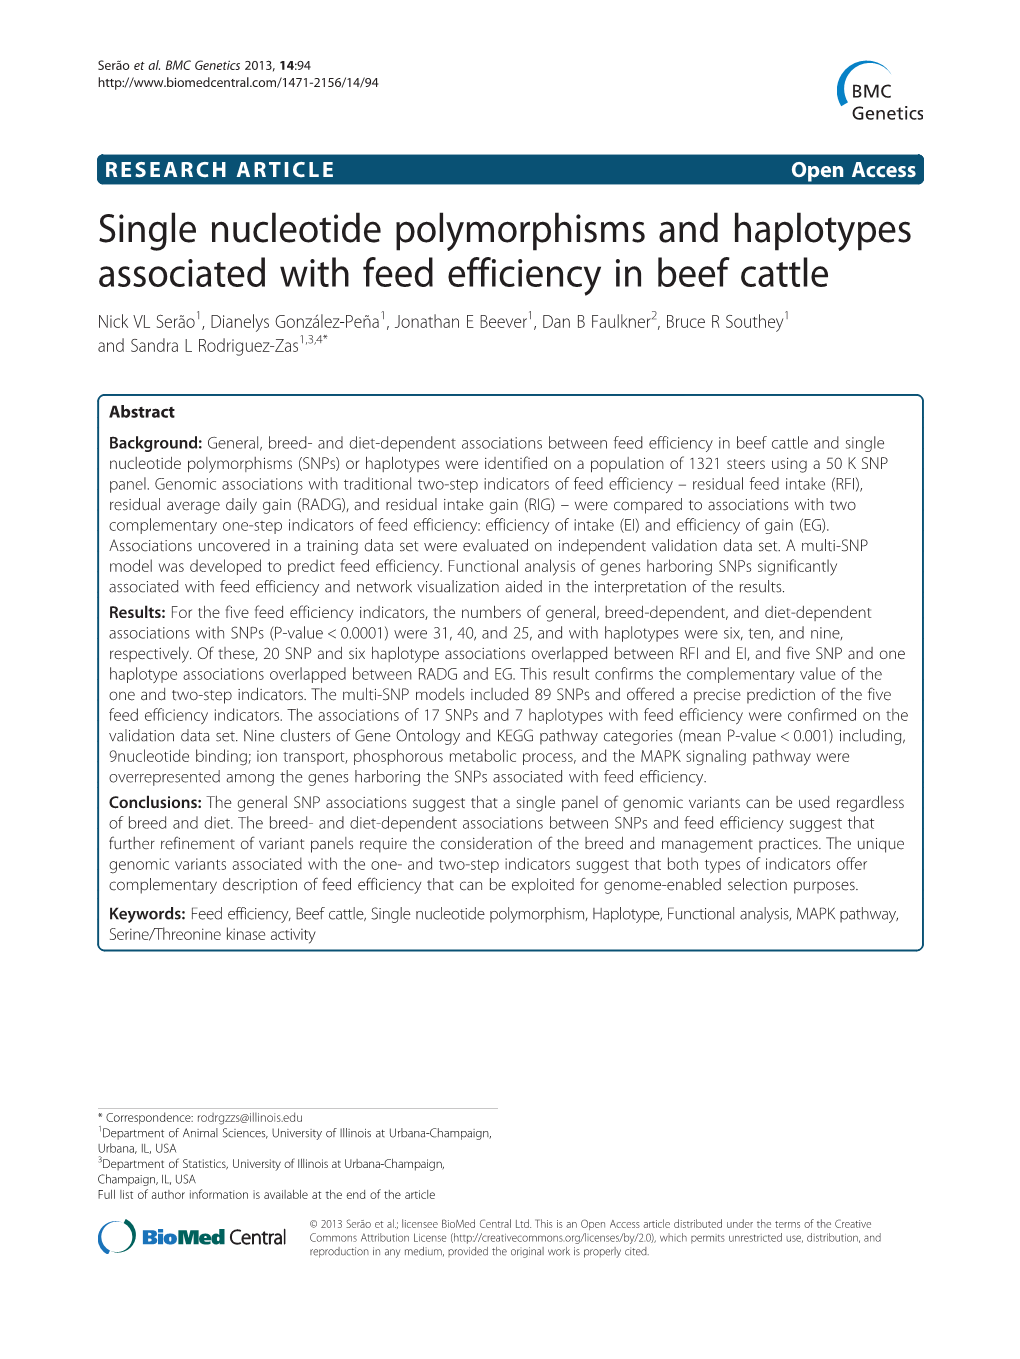 Single Nucleotide Polymorphisms and Haplotypes Associated with Feed